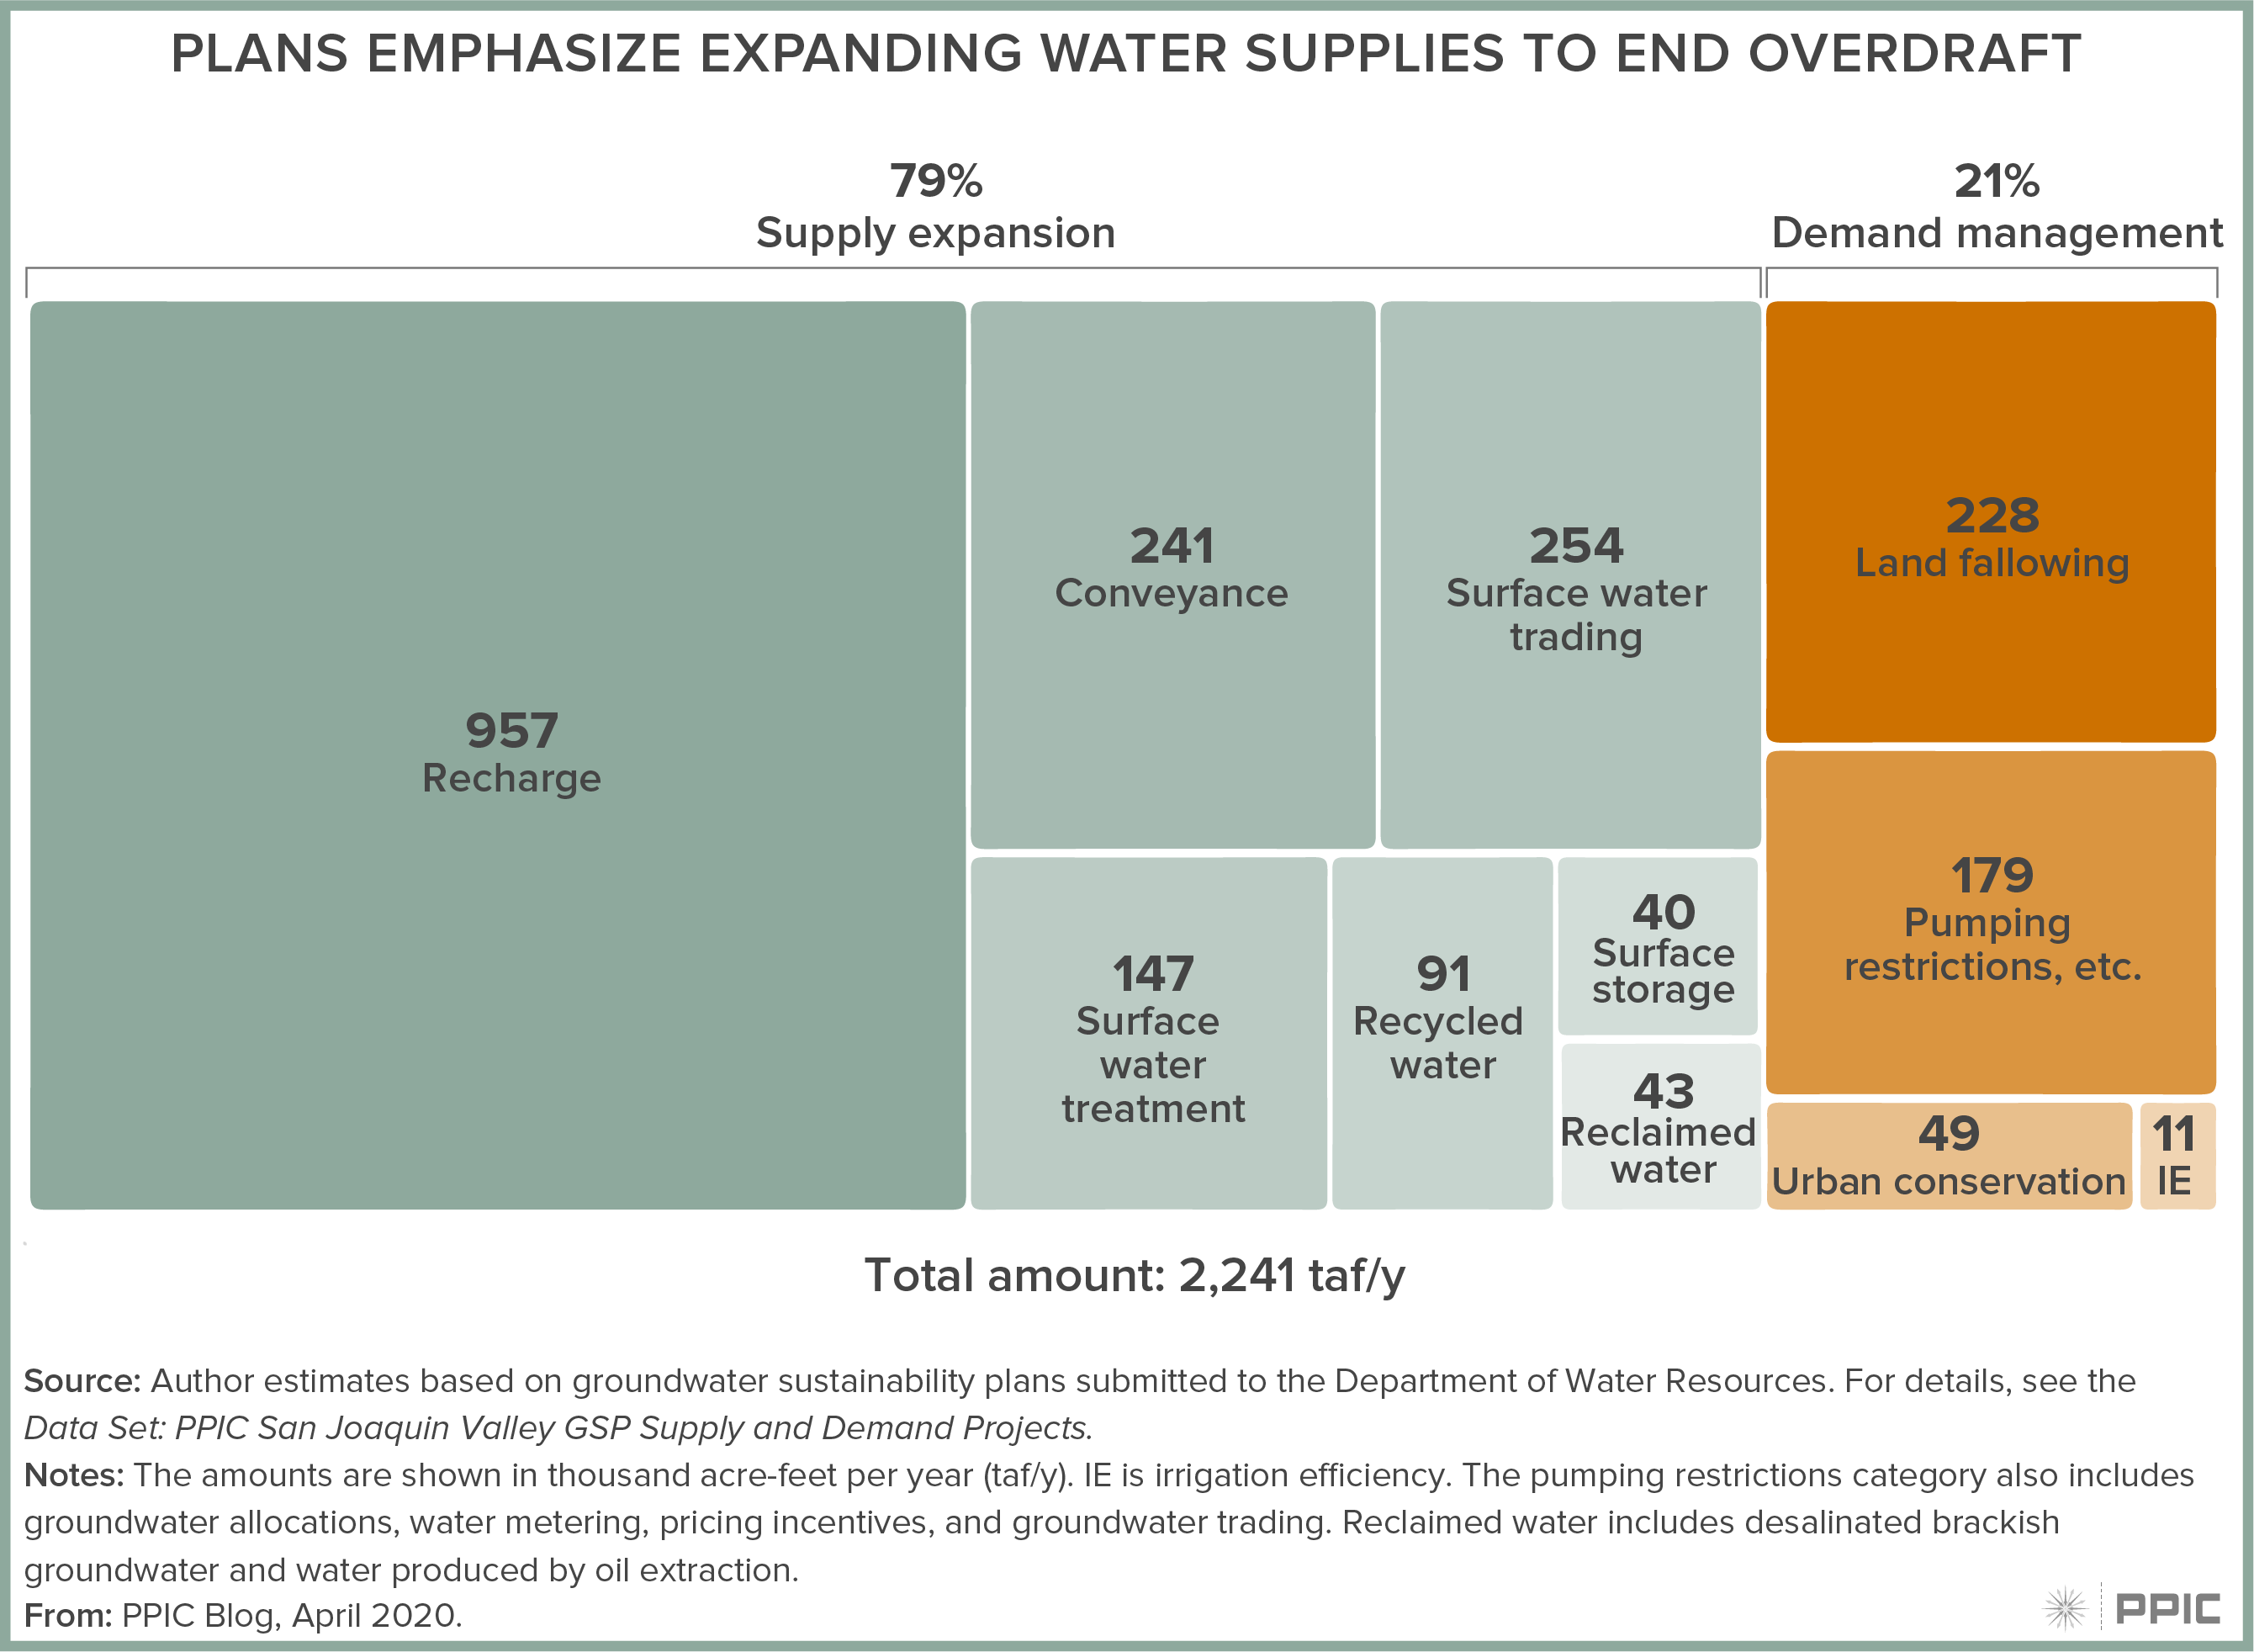 figure - Plans Emphasize Expanding Water Supplies to End Overdraft